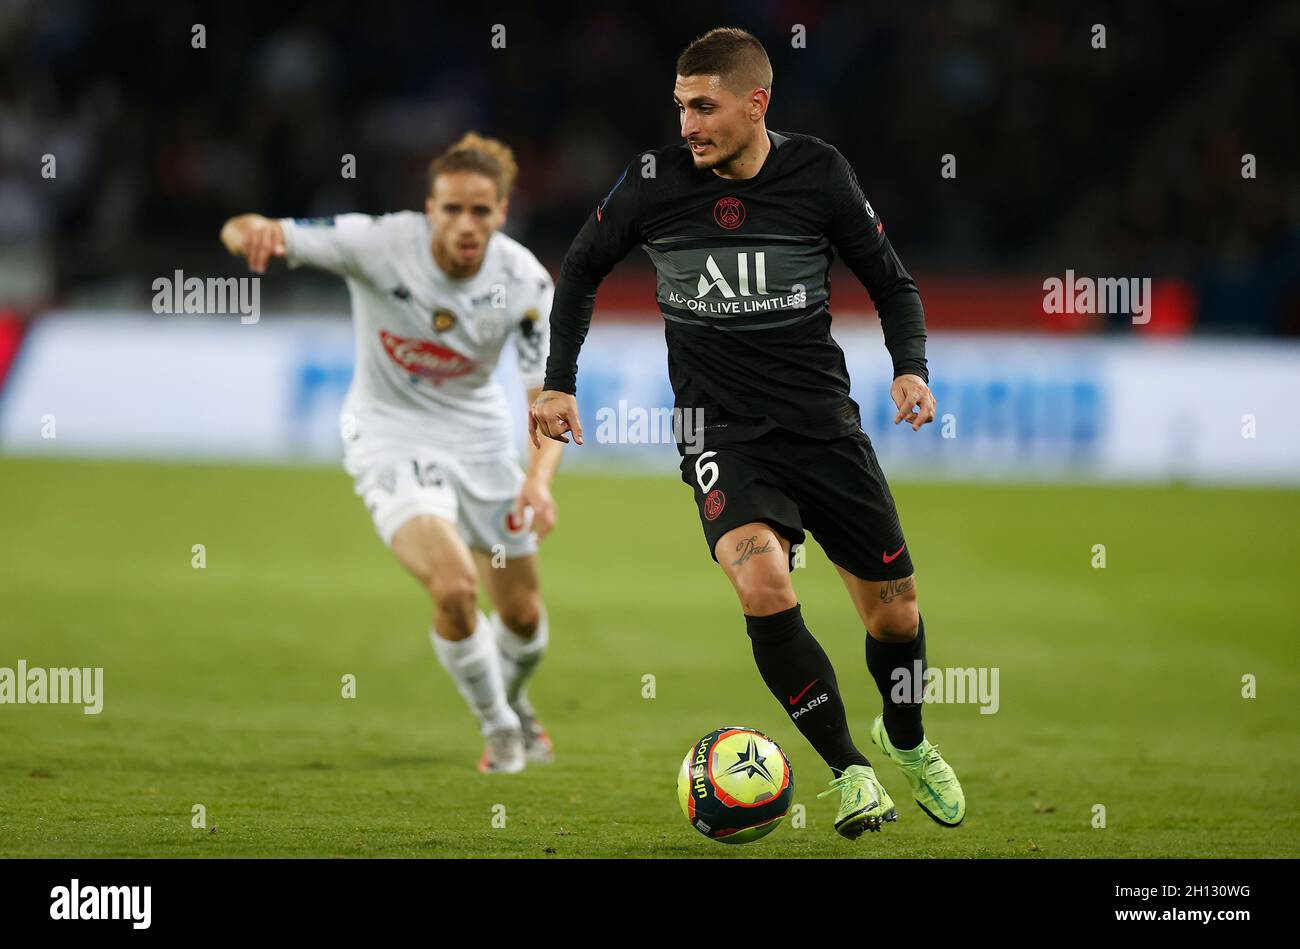 Paris, France. 16th Oct, 2021. Paris Saint Germain's Marco Verratti (R) competes during a French Ligue 1 football match between Paris Saint Germain (PSG) and Angers SCO in Paris, France, Oct. 15, 2021. Credit: Xinhua/Alamy Live News Stock Photo